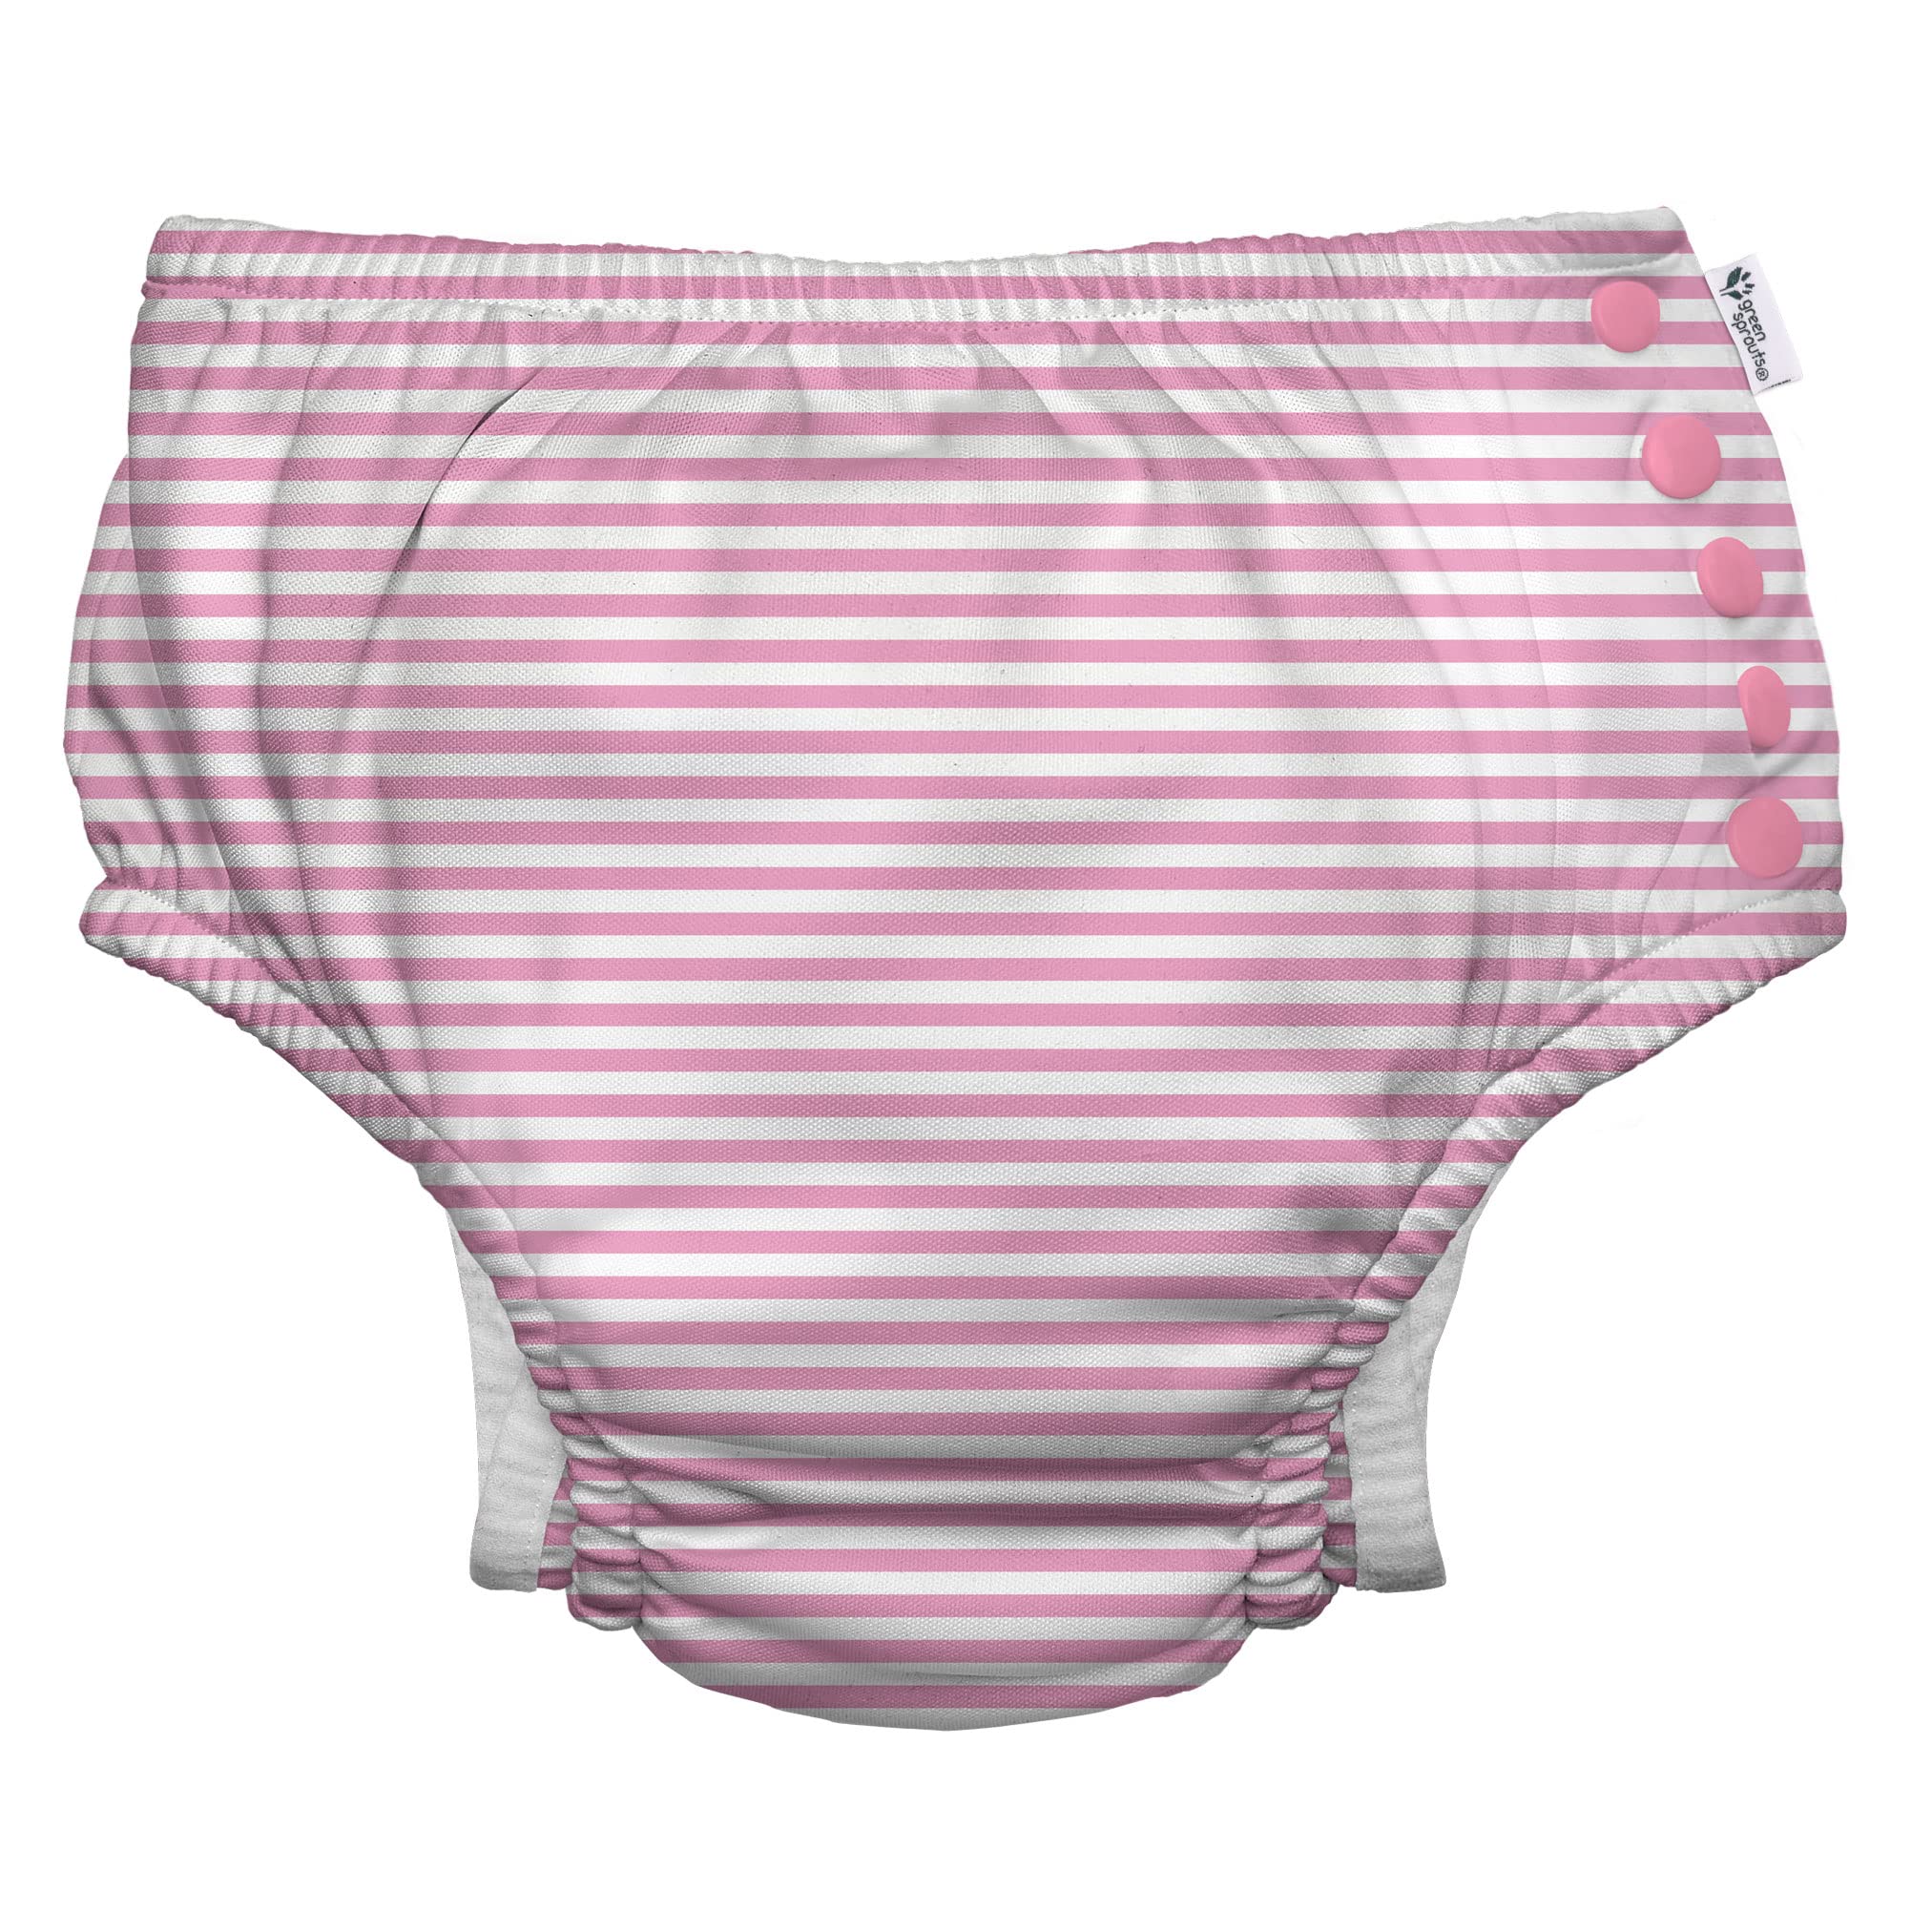 i play. by green sprouts Reusable, Eco Snap Swim Diaper with Gussets, UPF 50, Patented Design, STANDARD 100 by OEKO-TEX Certified - Light Pink Pinstripe - 24 mo